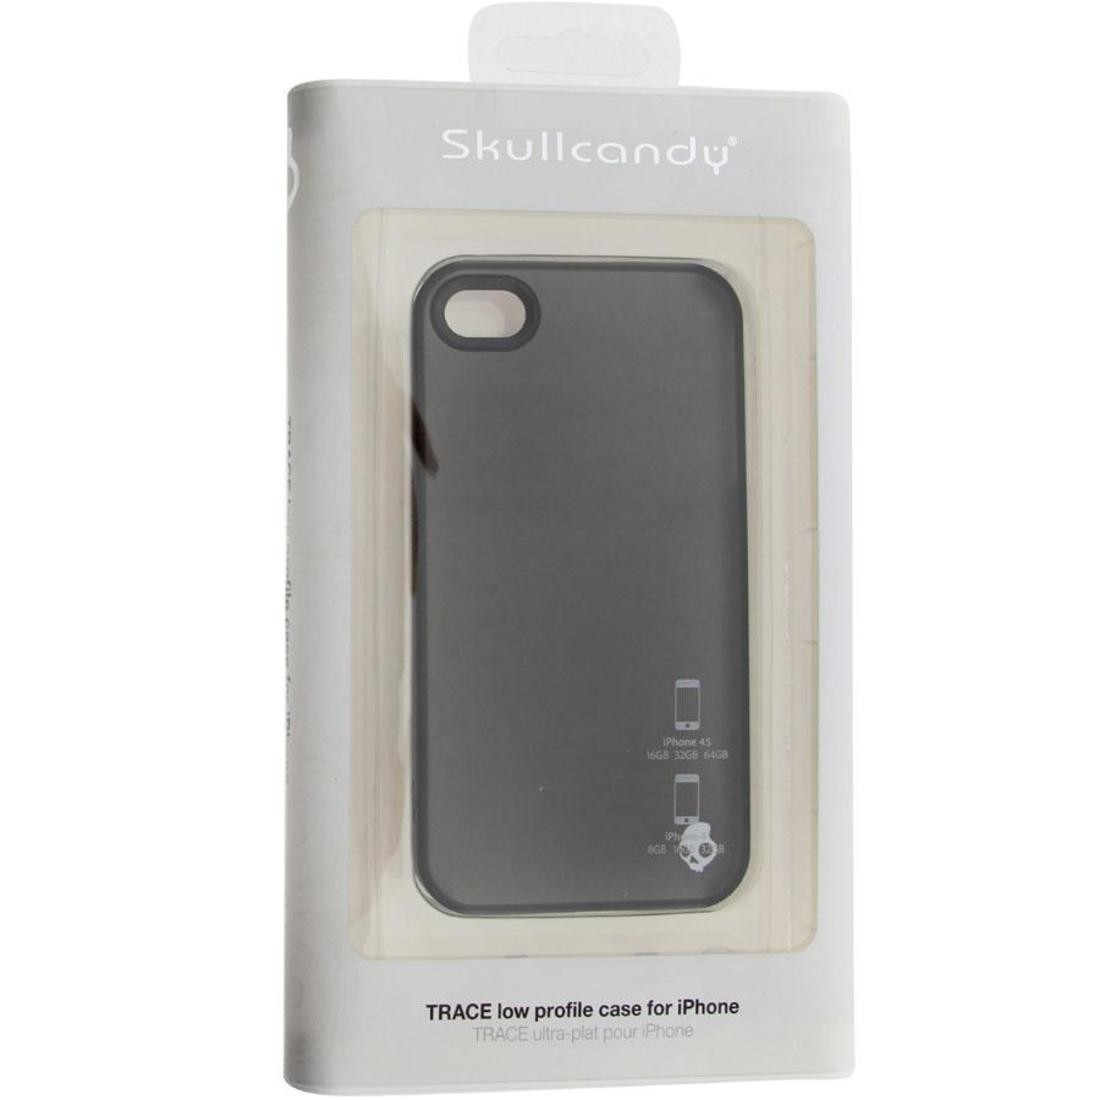 Skullcandy iPhone 4 And 4S Trace Low Profile Case (charcoal)